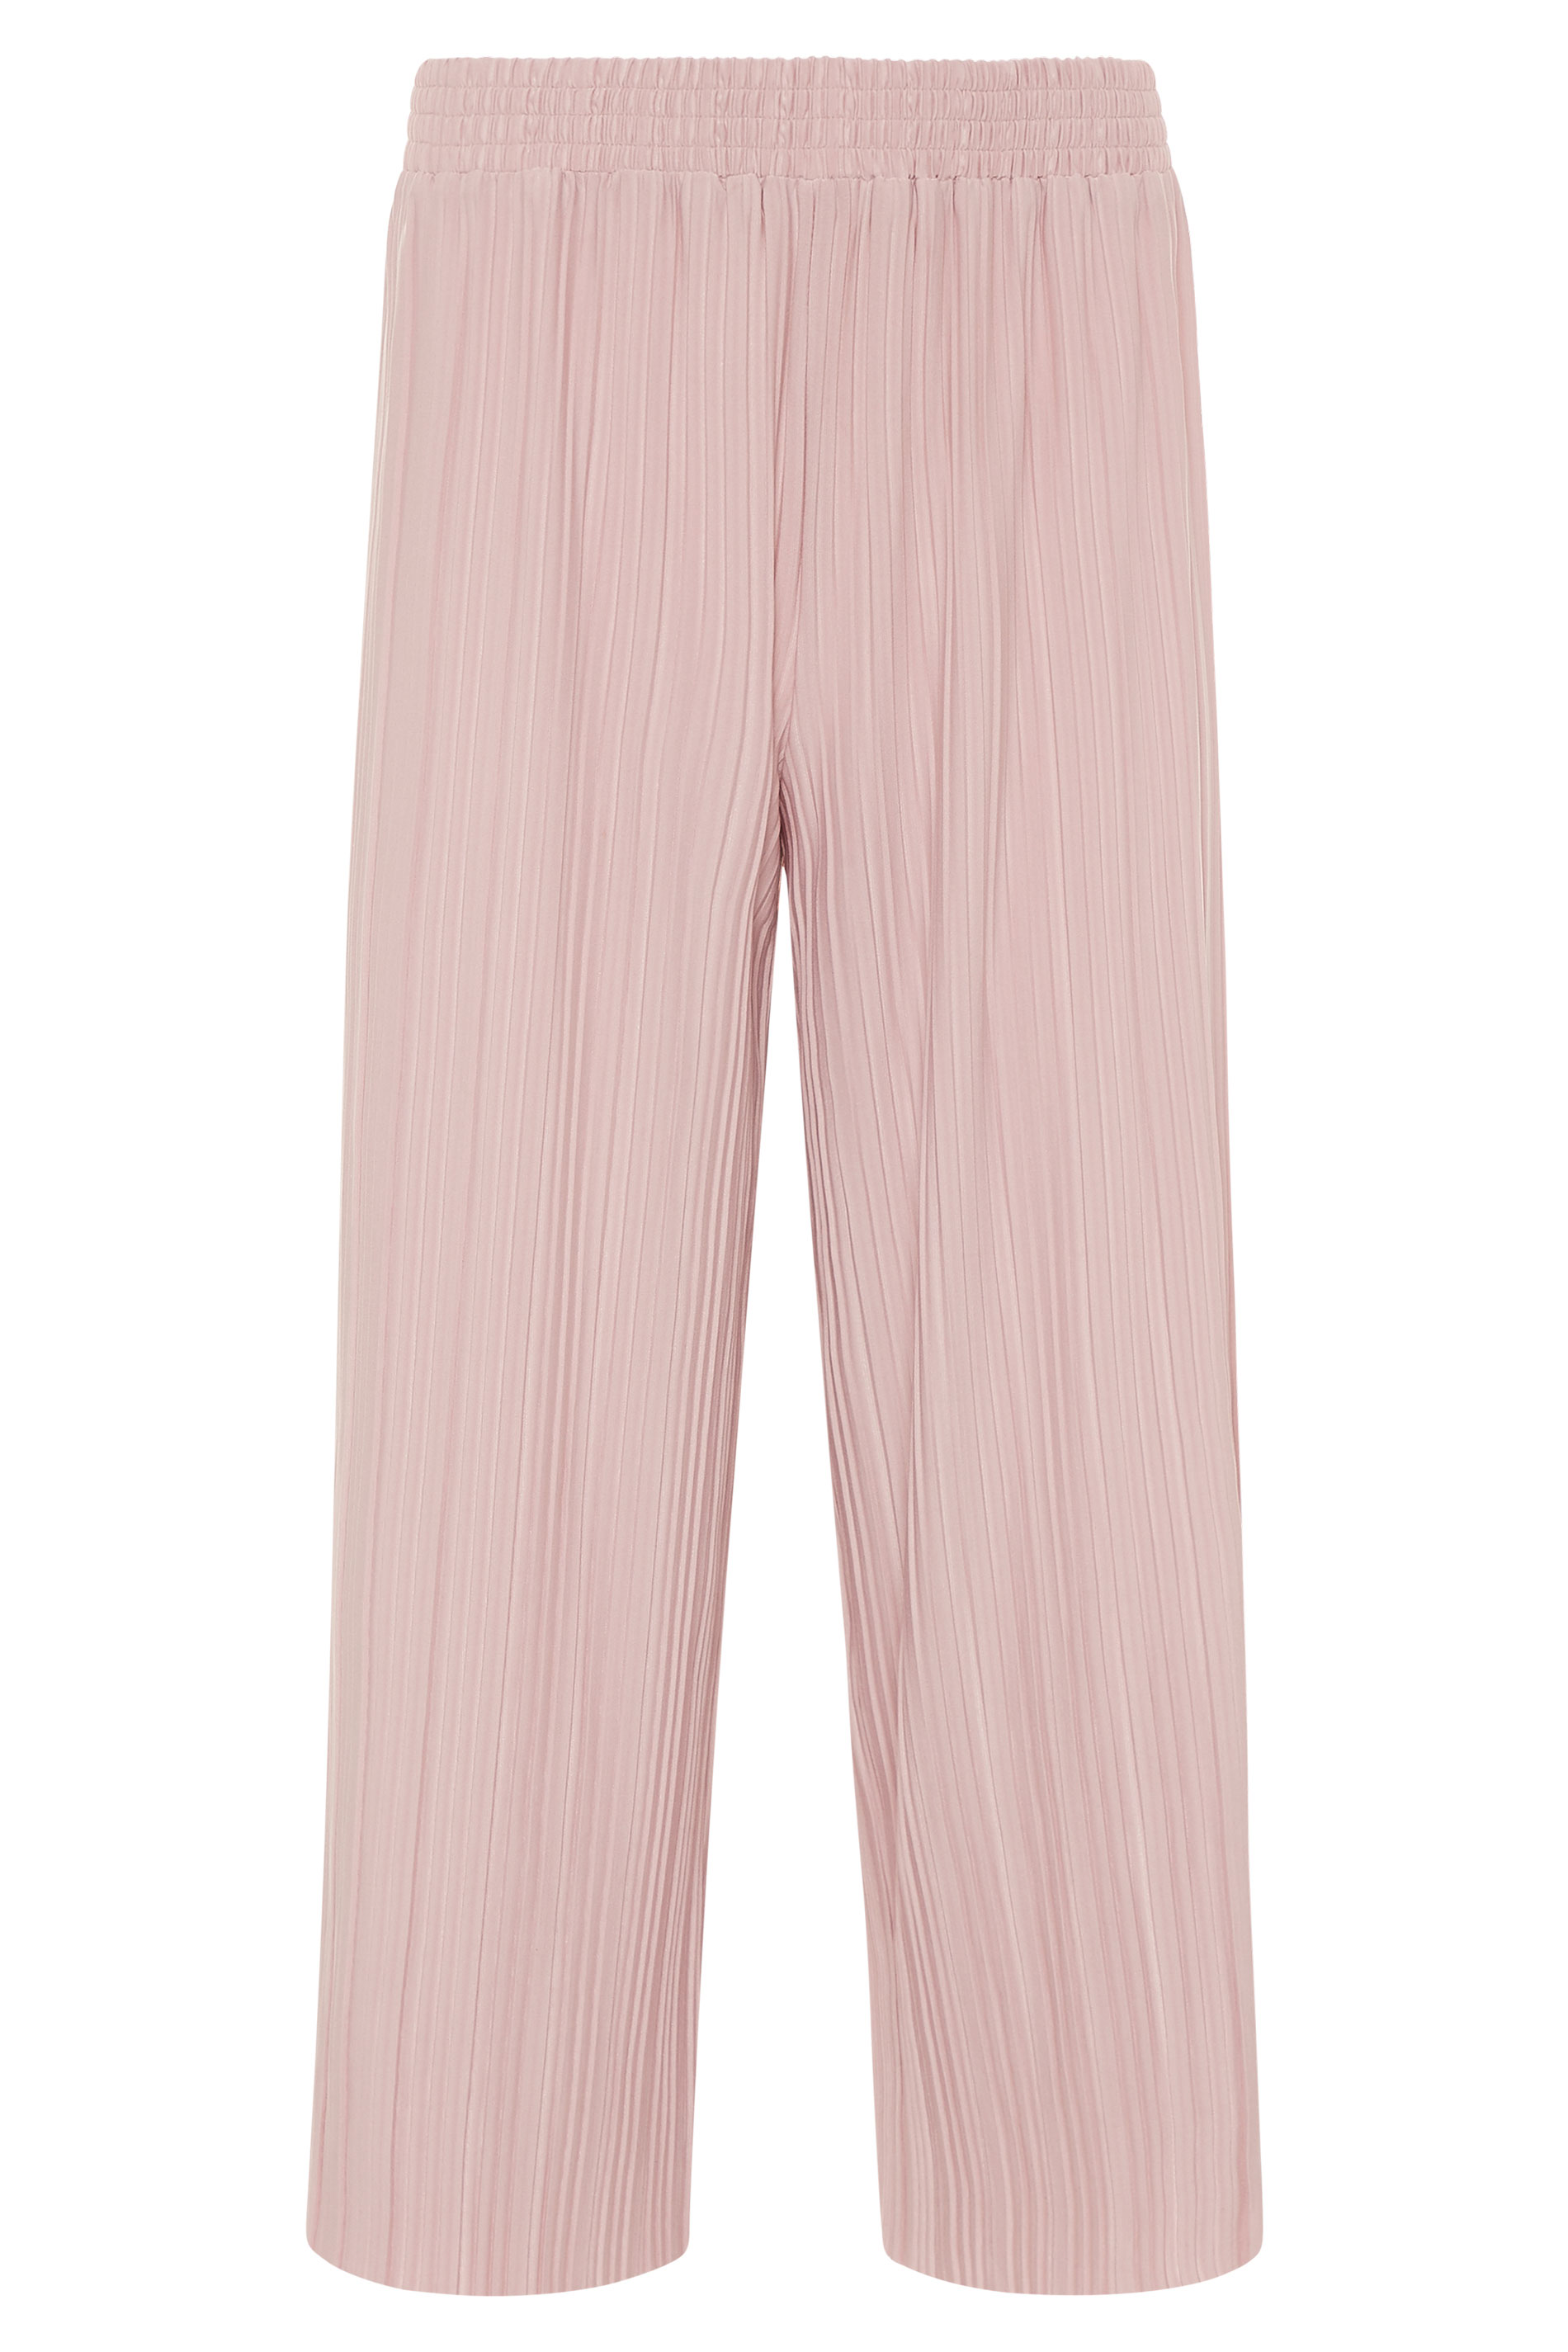 Pink Plisse Culotte Trousers | Long Tall Sally